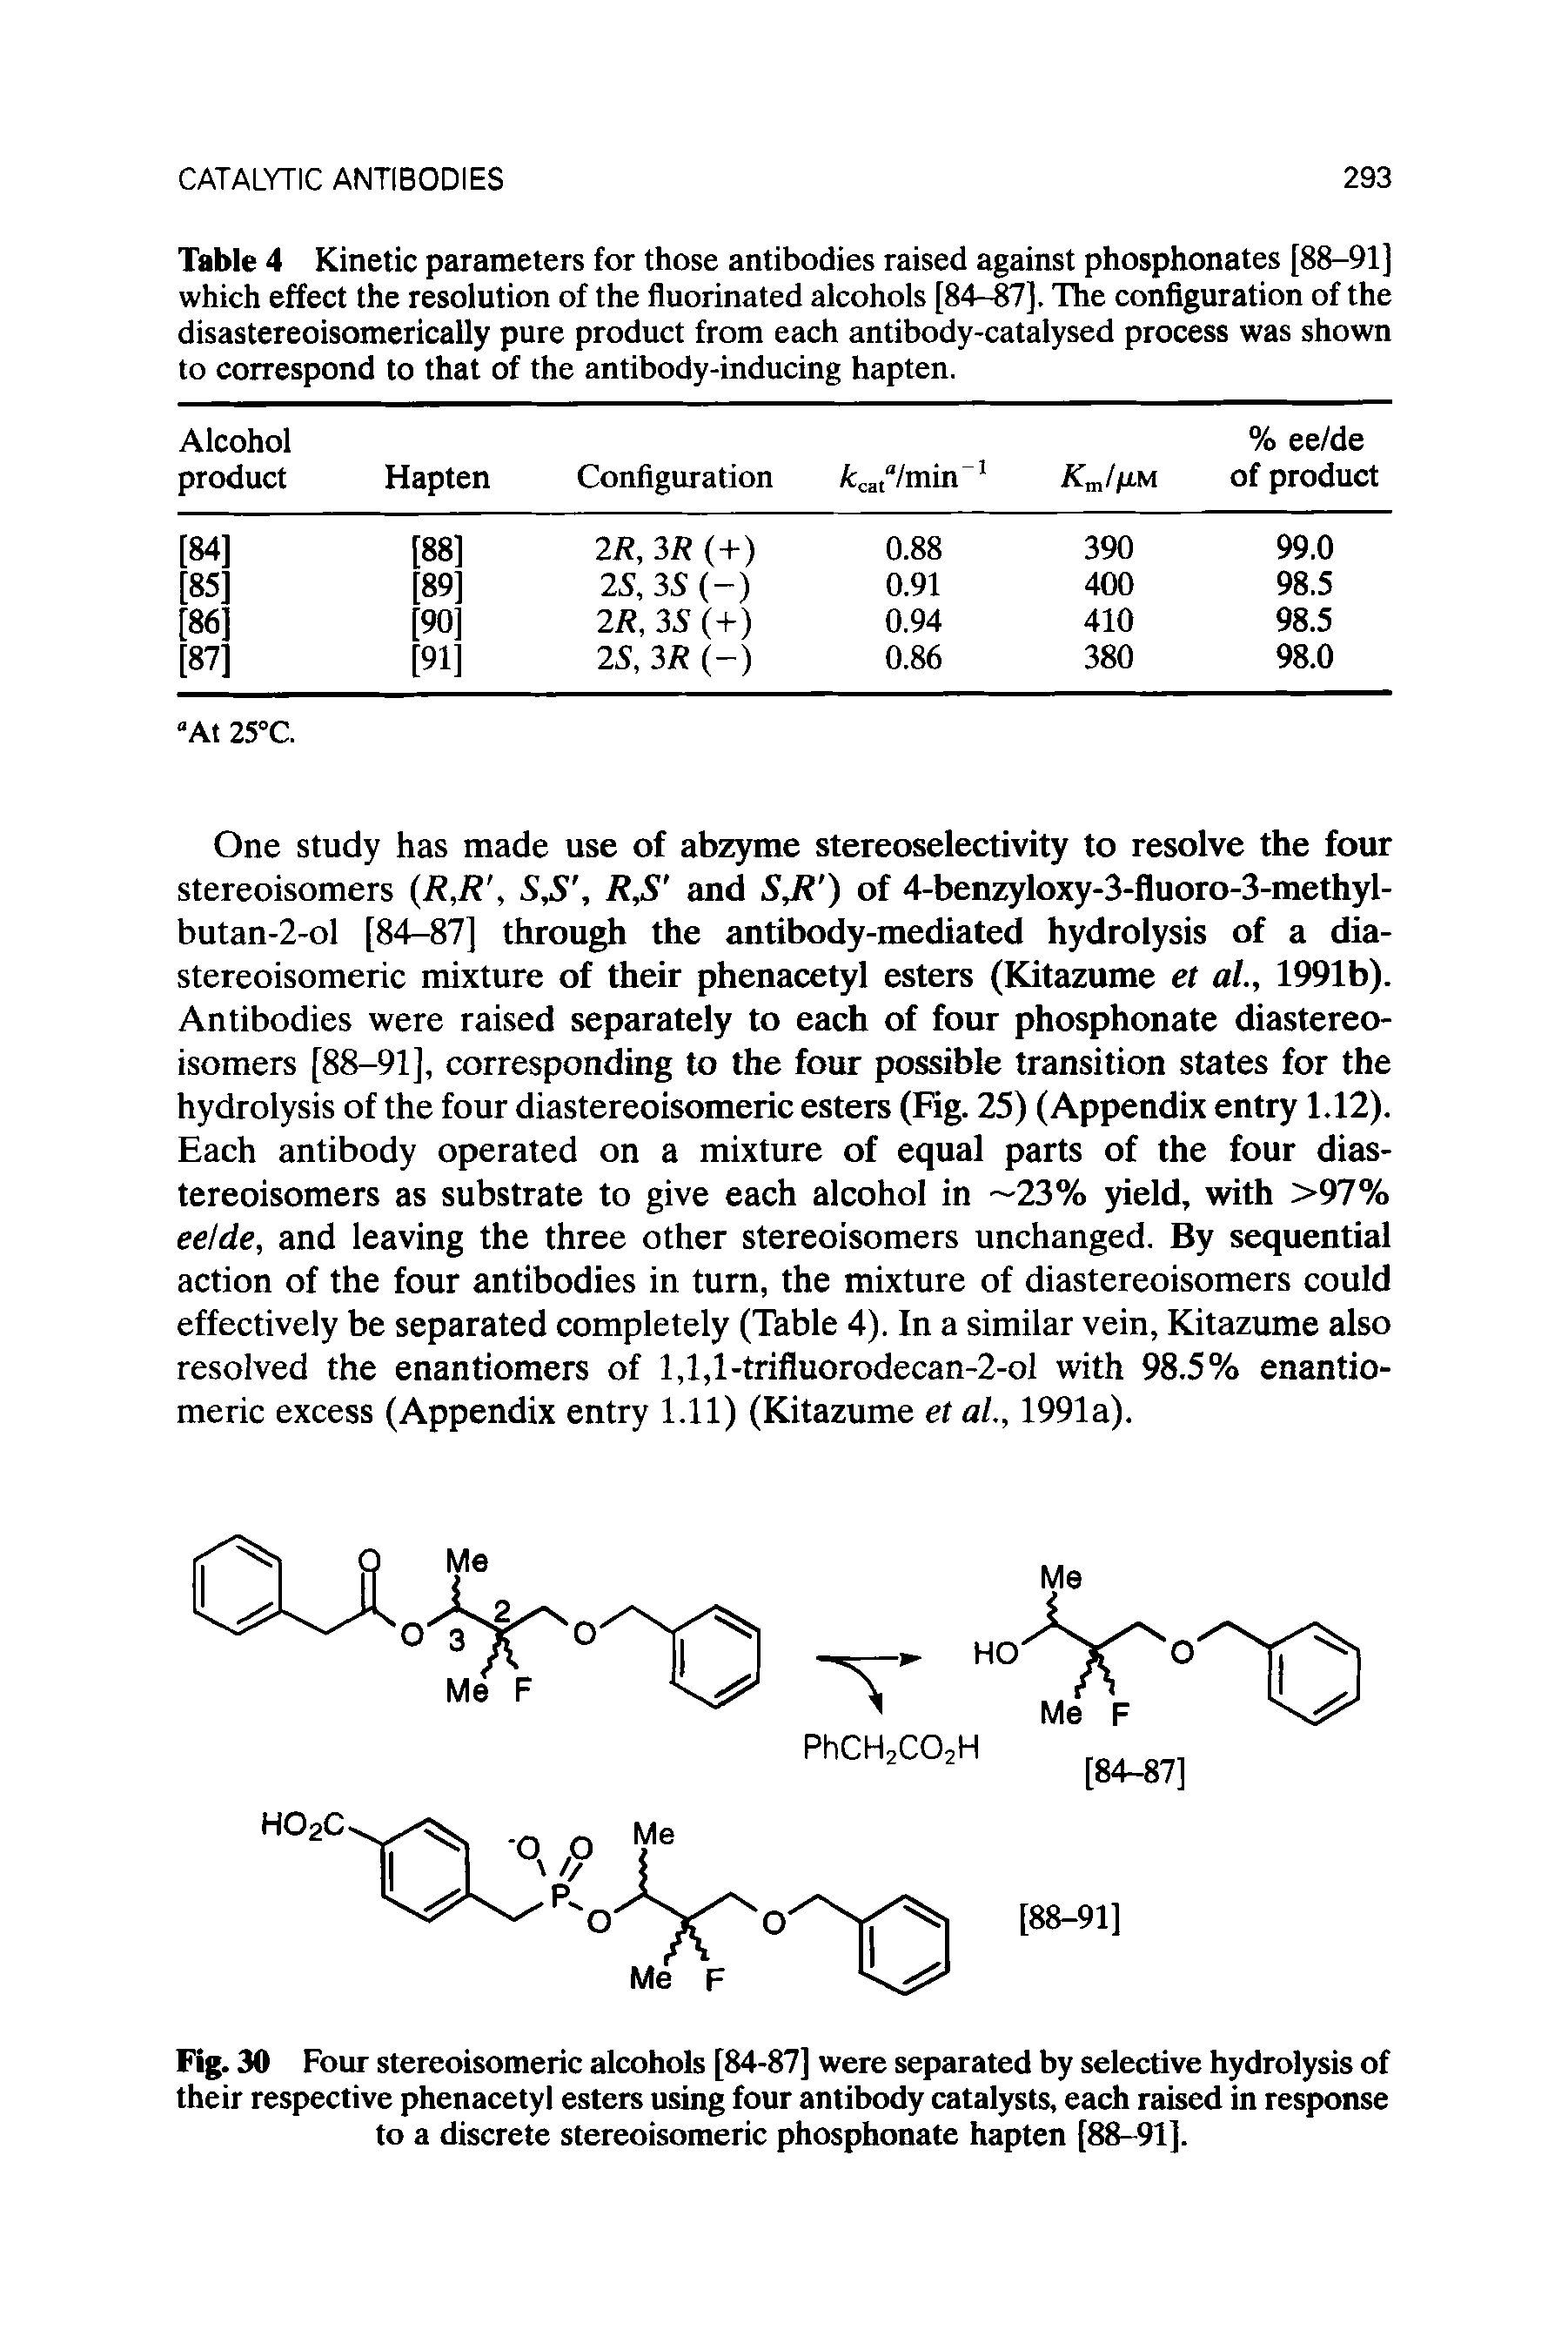 Table 4 Kinetic parameters for those antibodies raised against phosphonates [88-91] which effect the resolution of the fluorinated alcohols [84-87]. The configuration of the disastereoisomerically pure product from each antibody-catalysed process was shown to correspond to that of the antibody-inducing hapten.